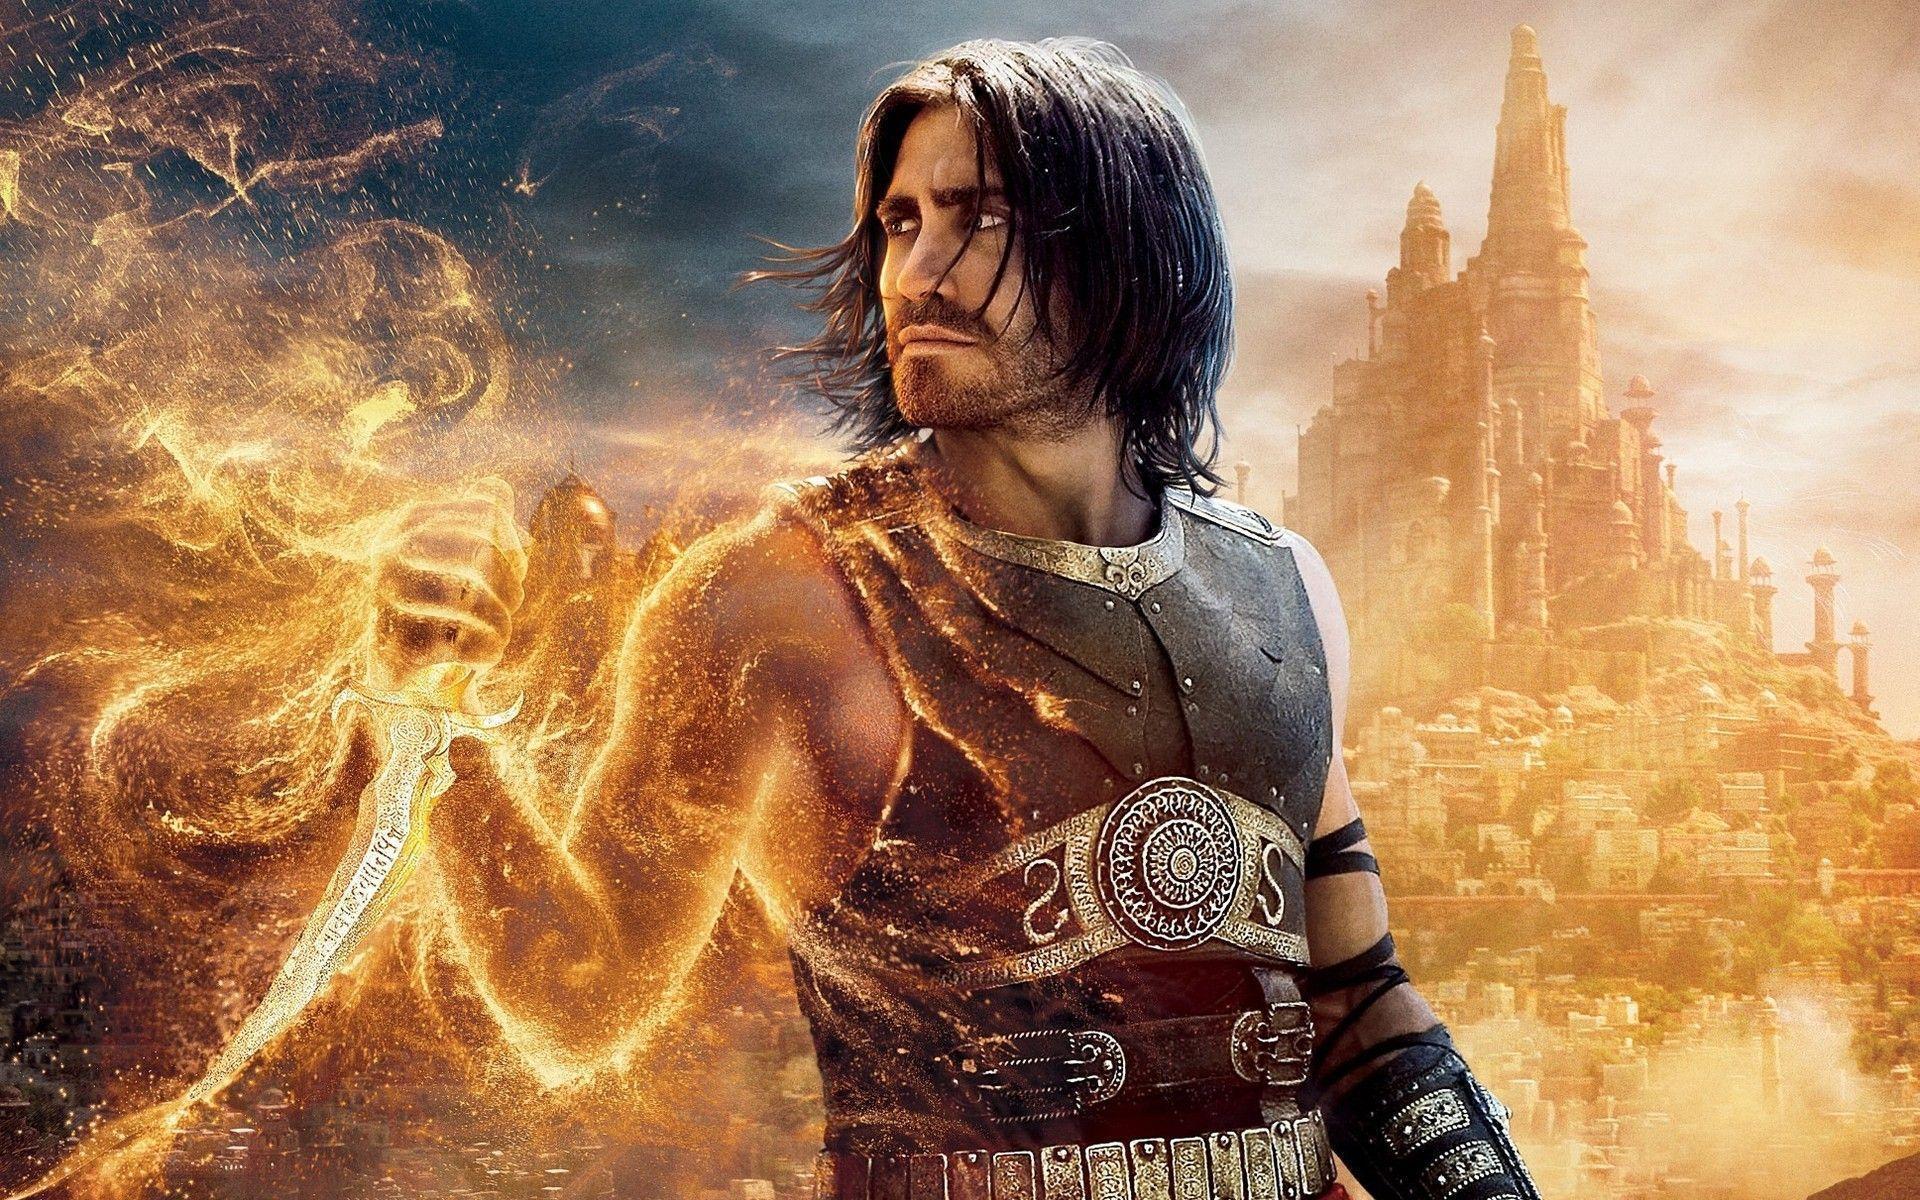 Prince Of Persia: The Sands Of Time Wallpaper. Prince Of